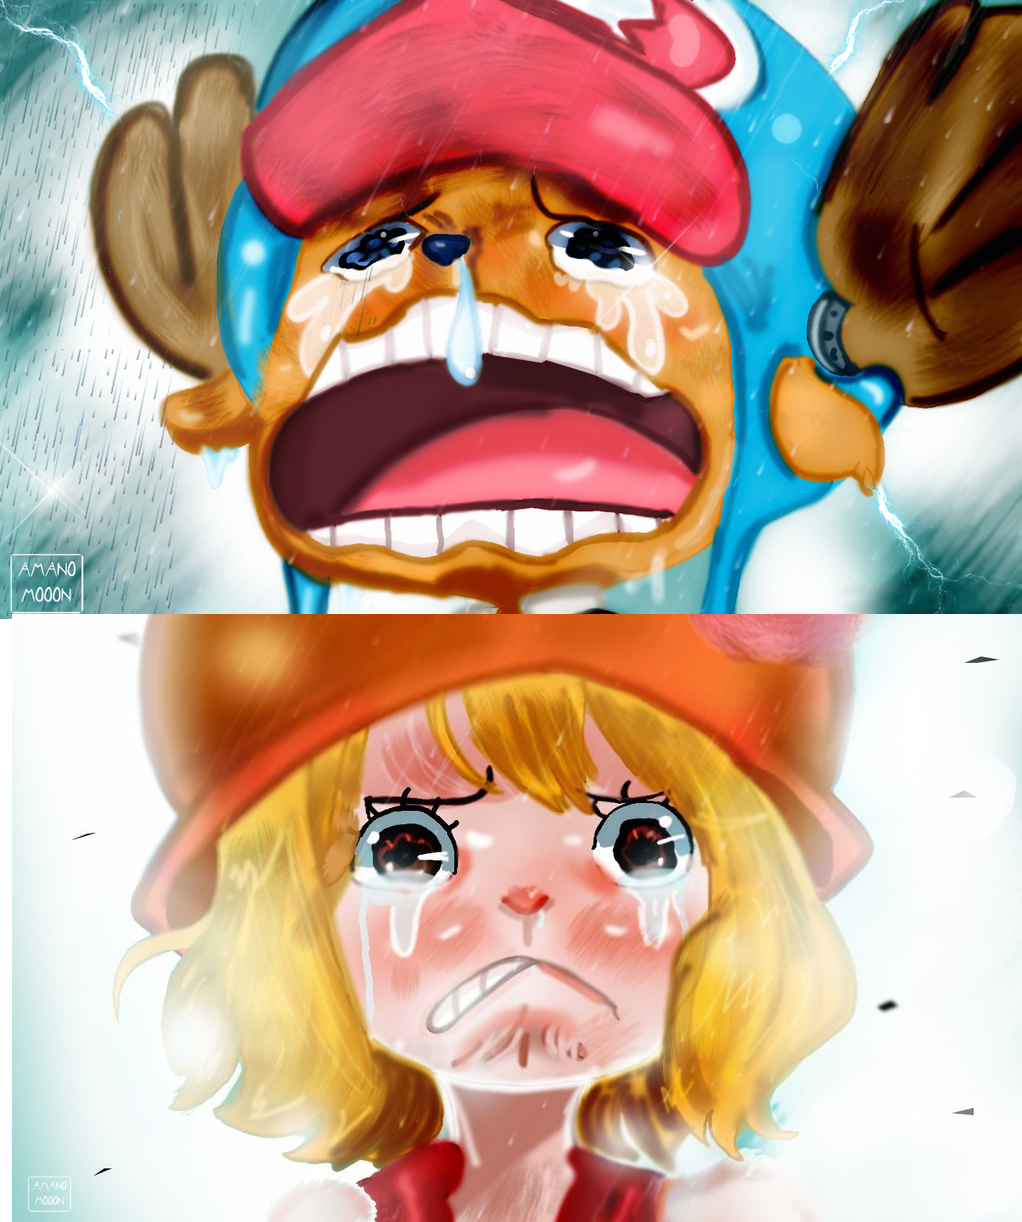 One Piece Chapter 879 Chopper Nami Carrot Cry Sad by Amanomoon on